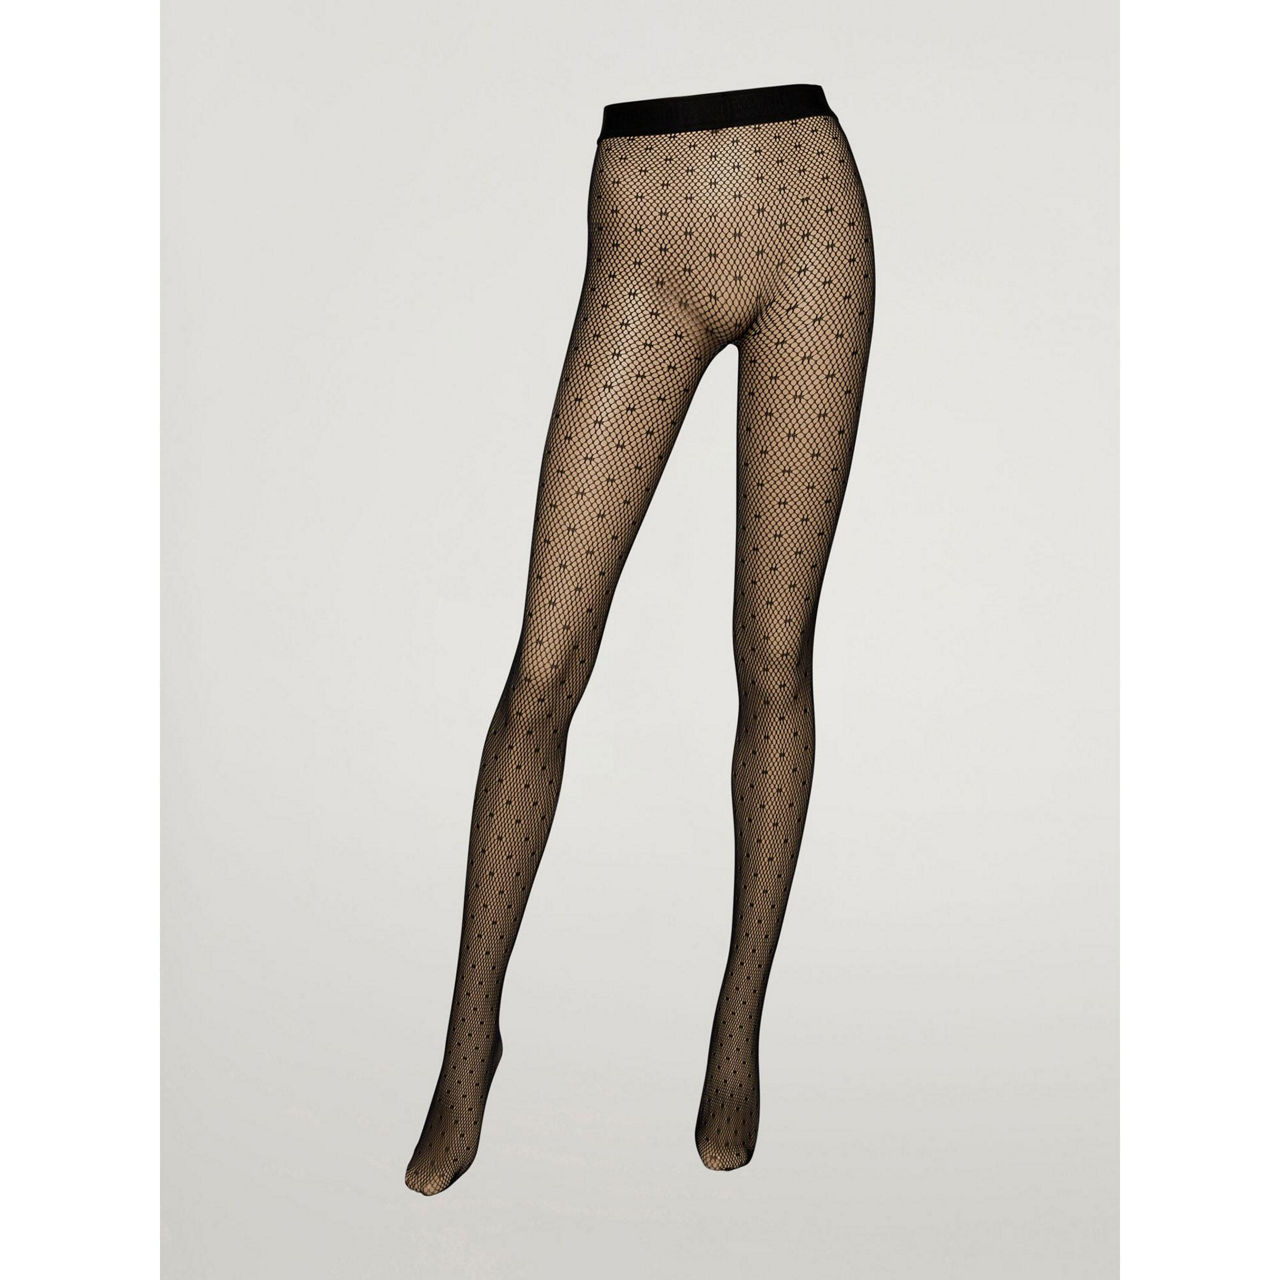 Wolford Aurora Monogram Knee Highs In Stock At UK Tights